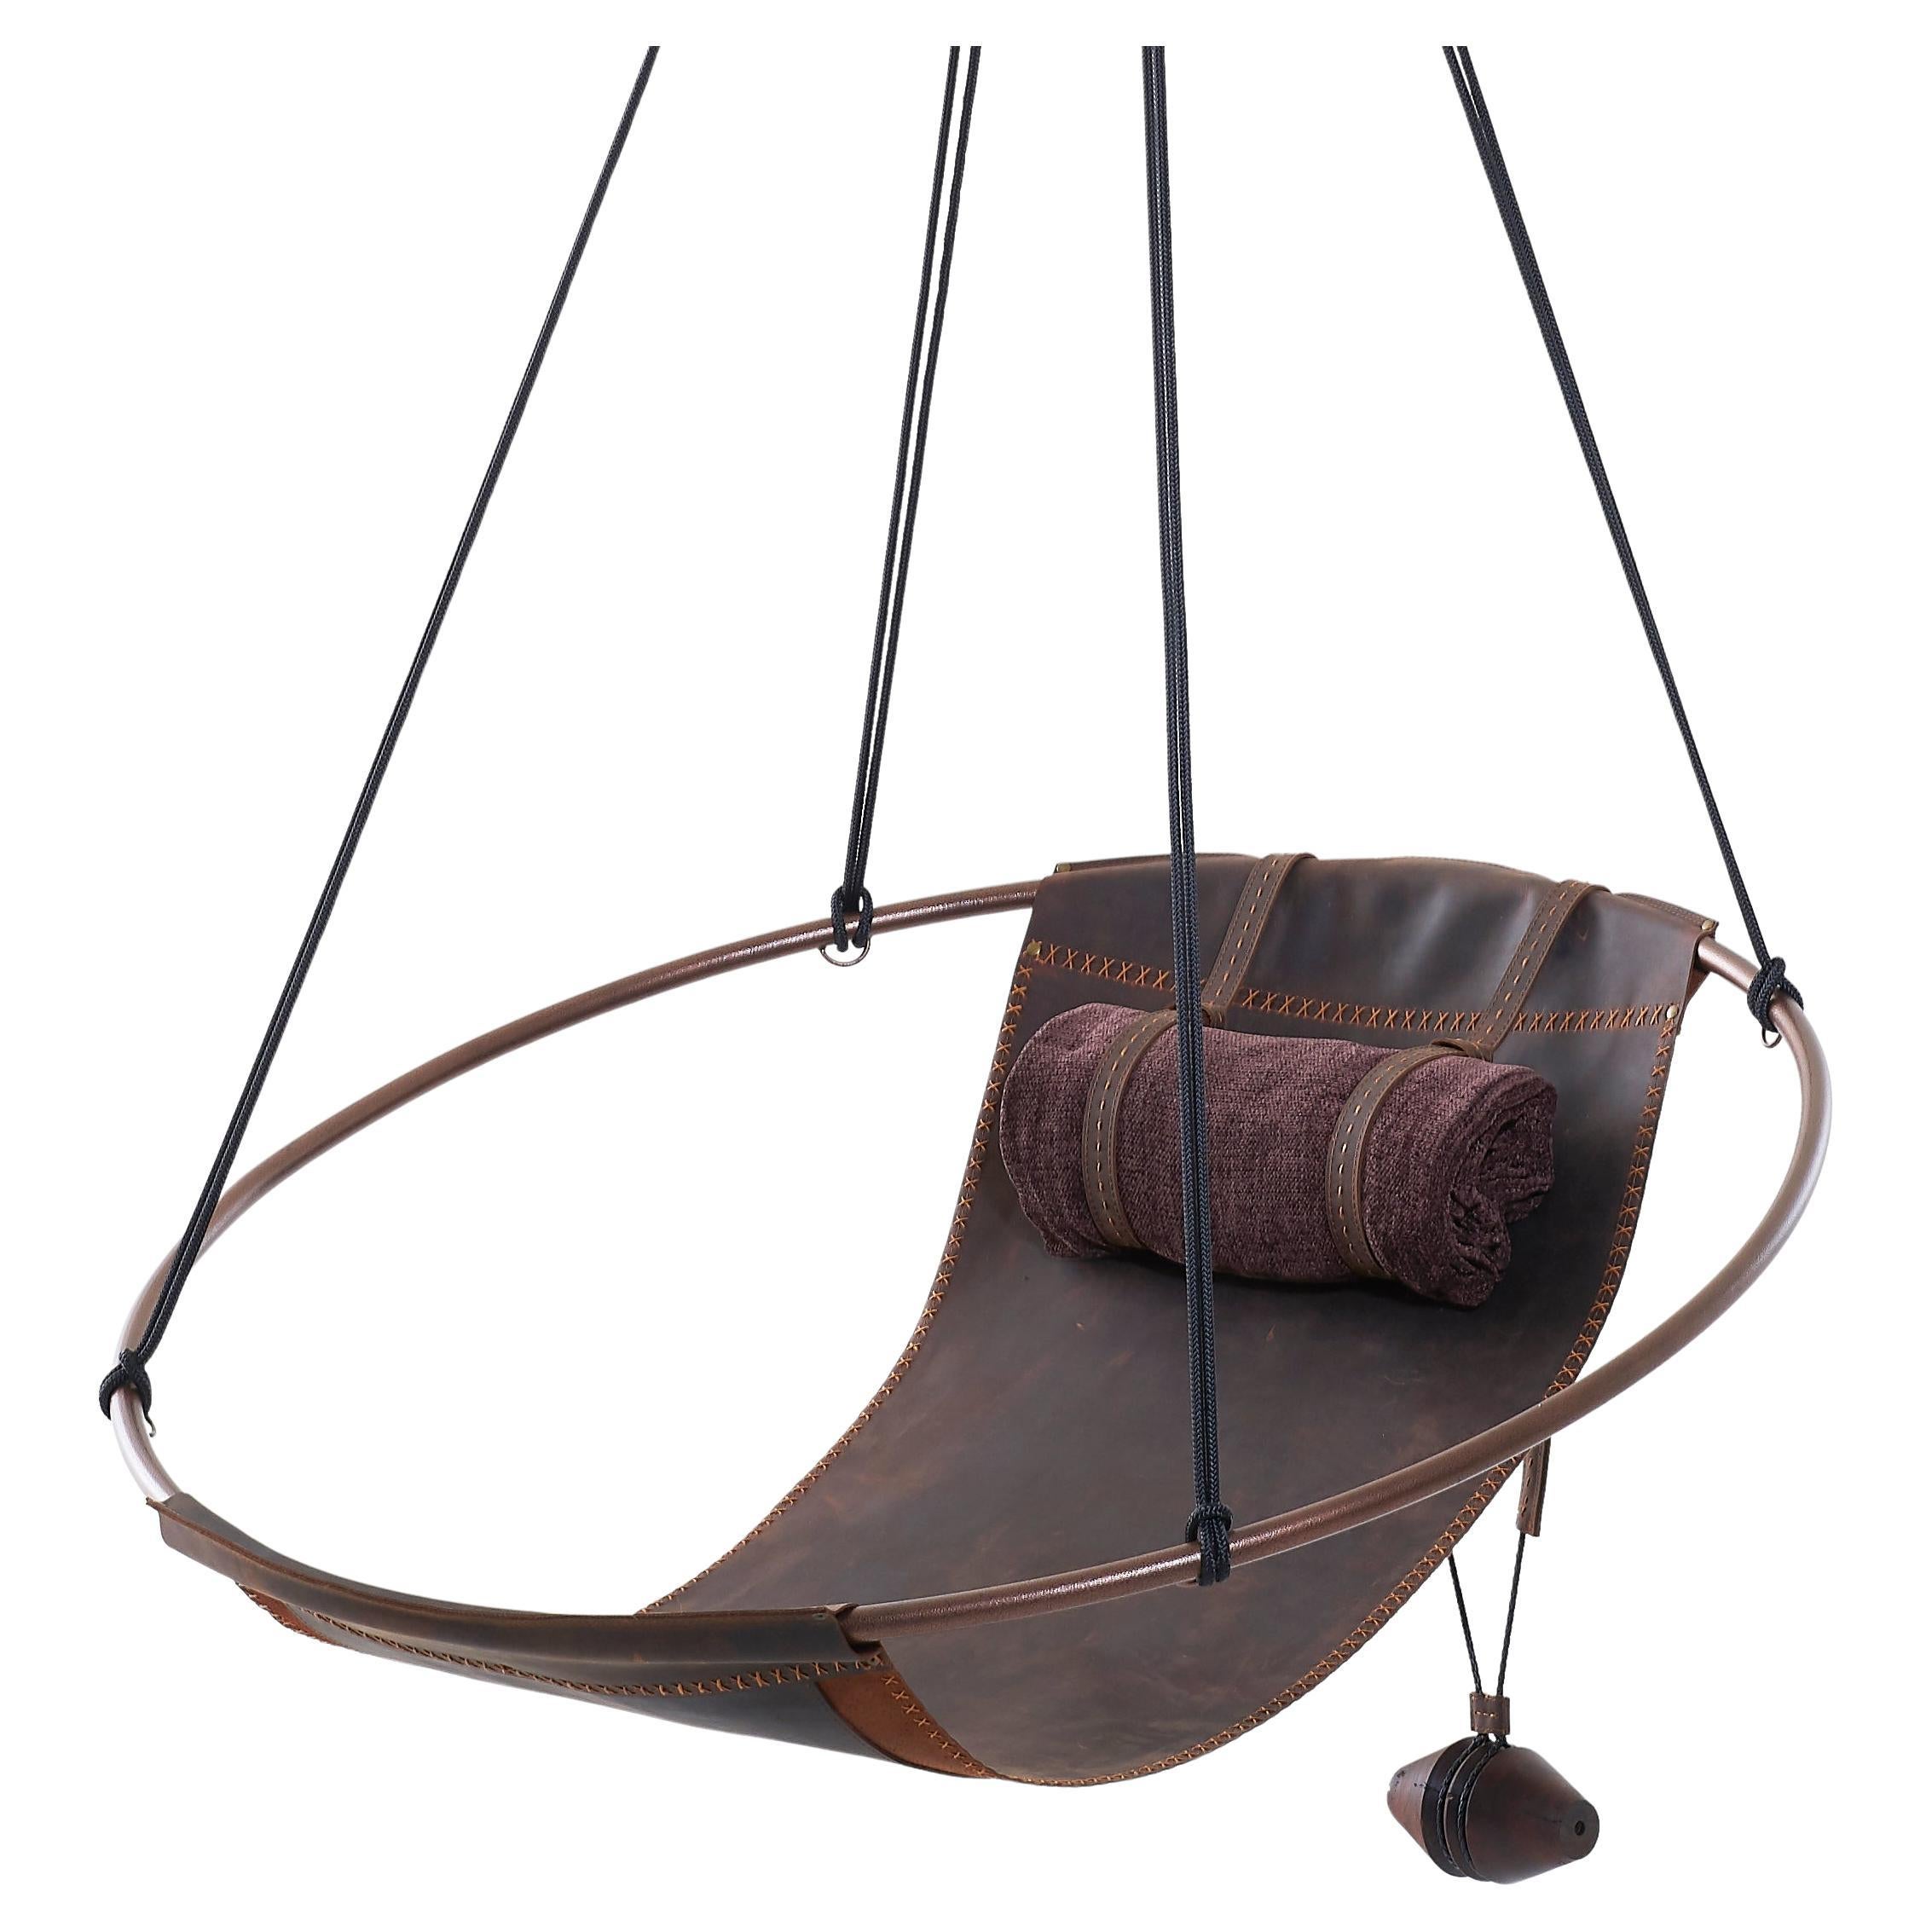 Oil Tanned Genuine Leather Suspended Chair For Sale